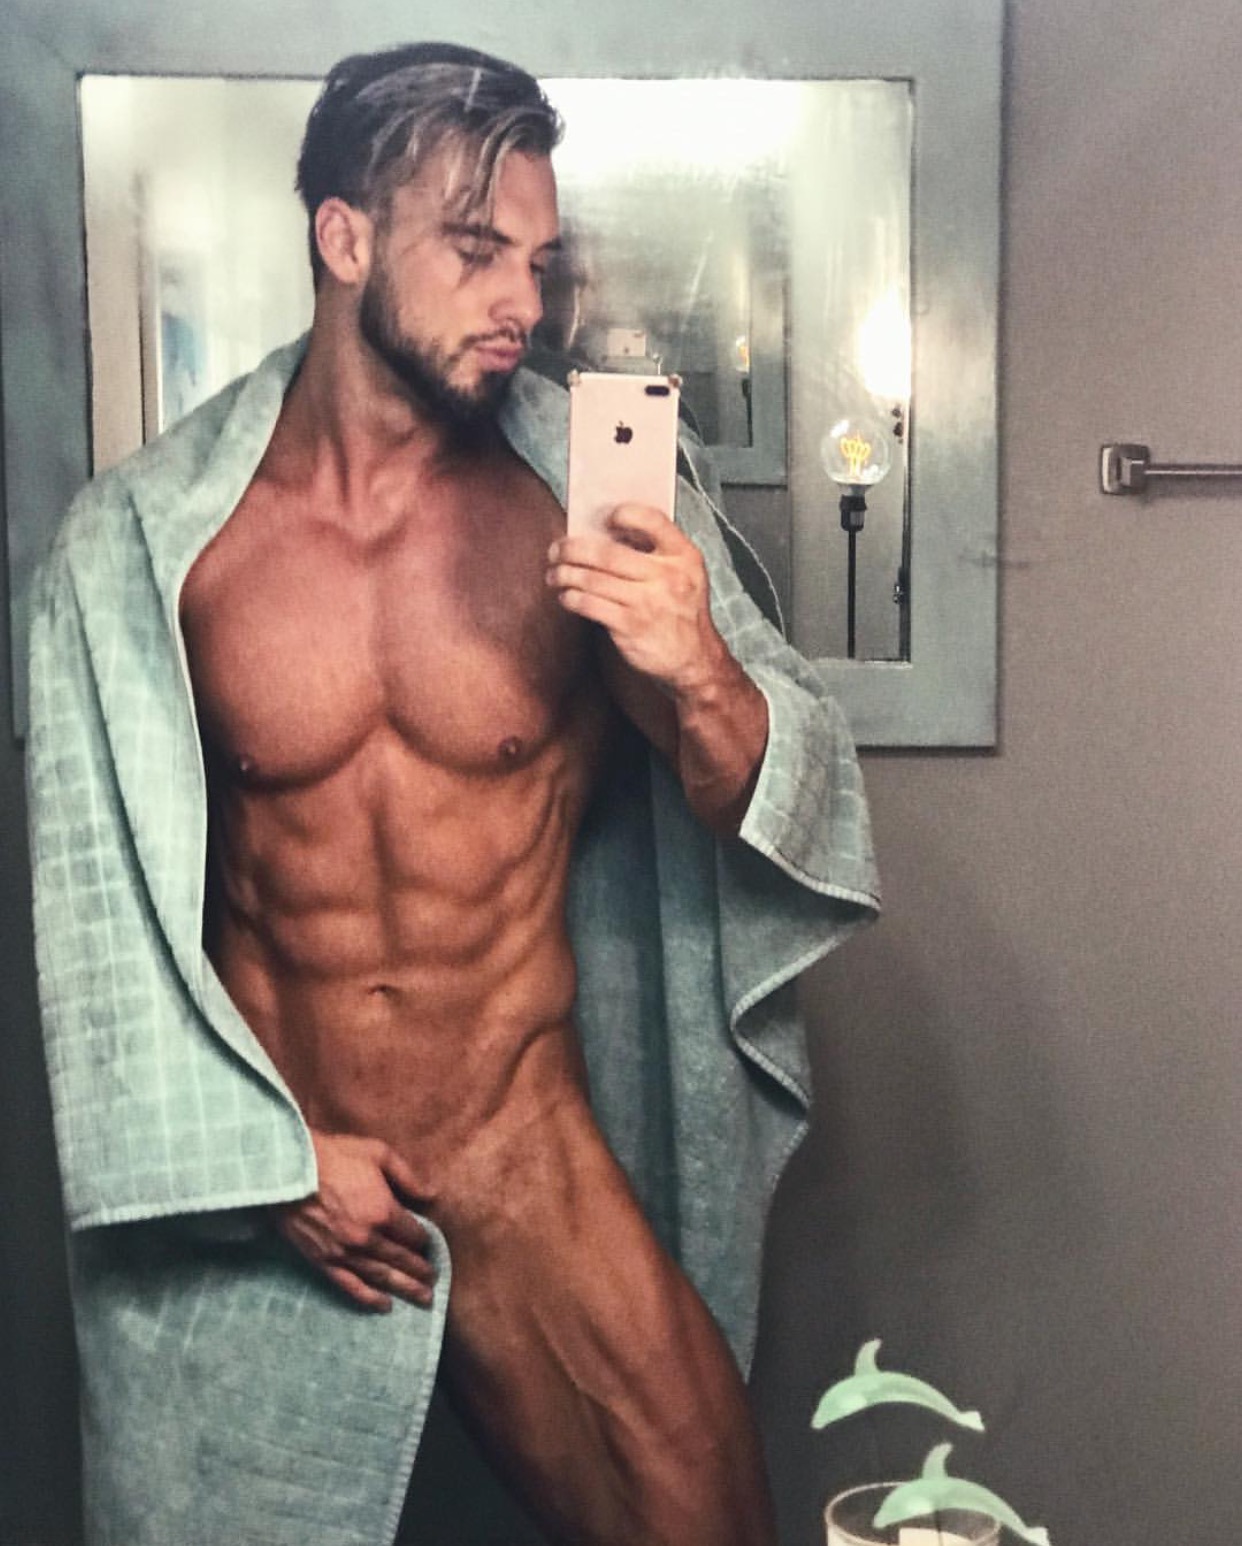 OMG, he’s naked: Fitness model and photographer Alfred Liebl.